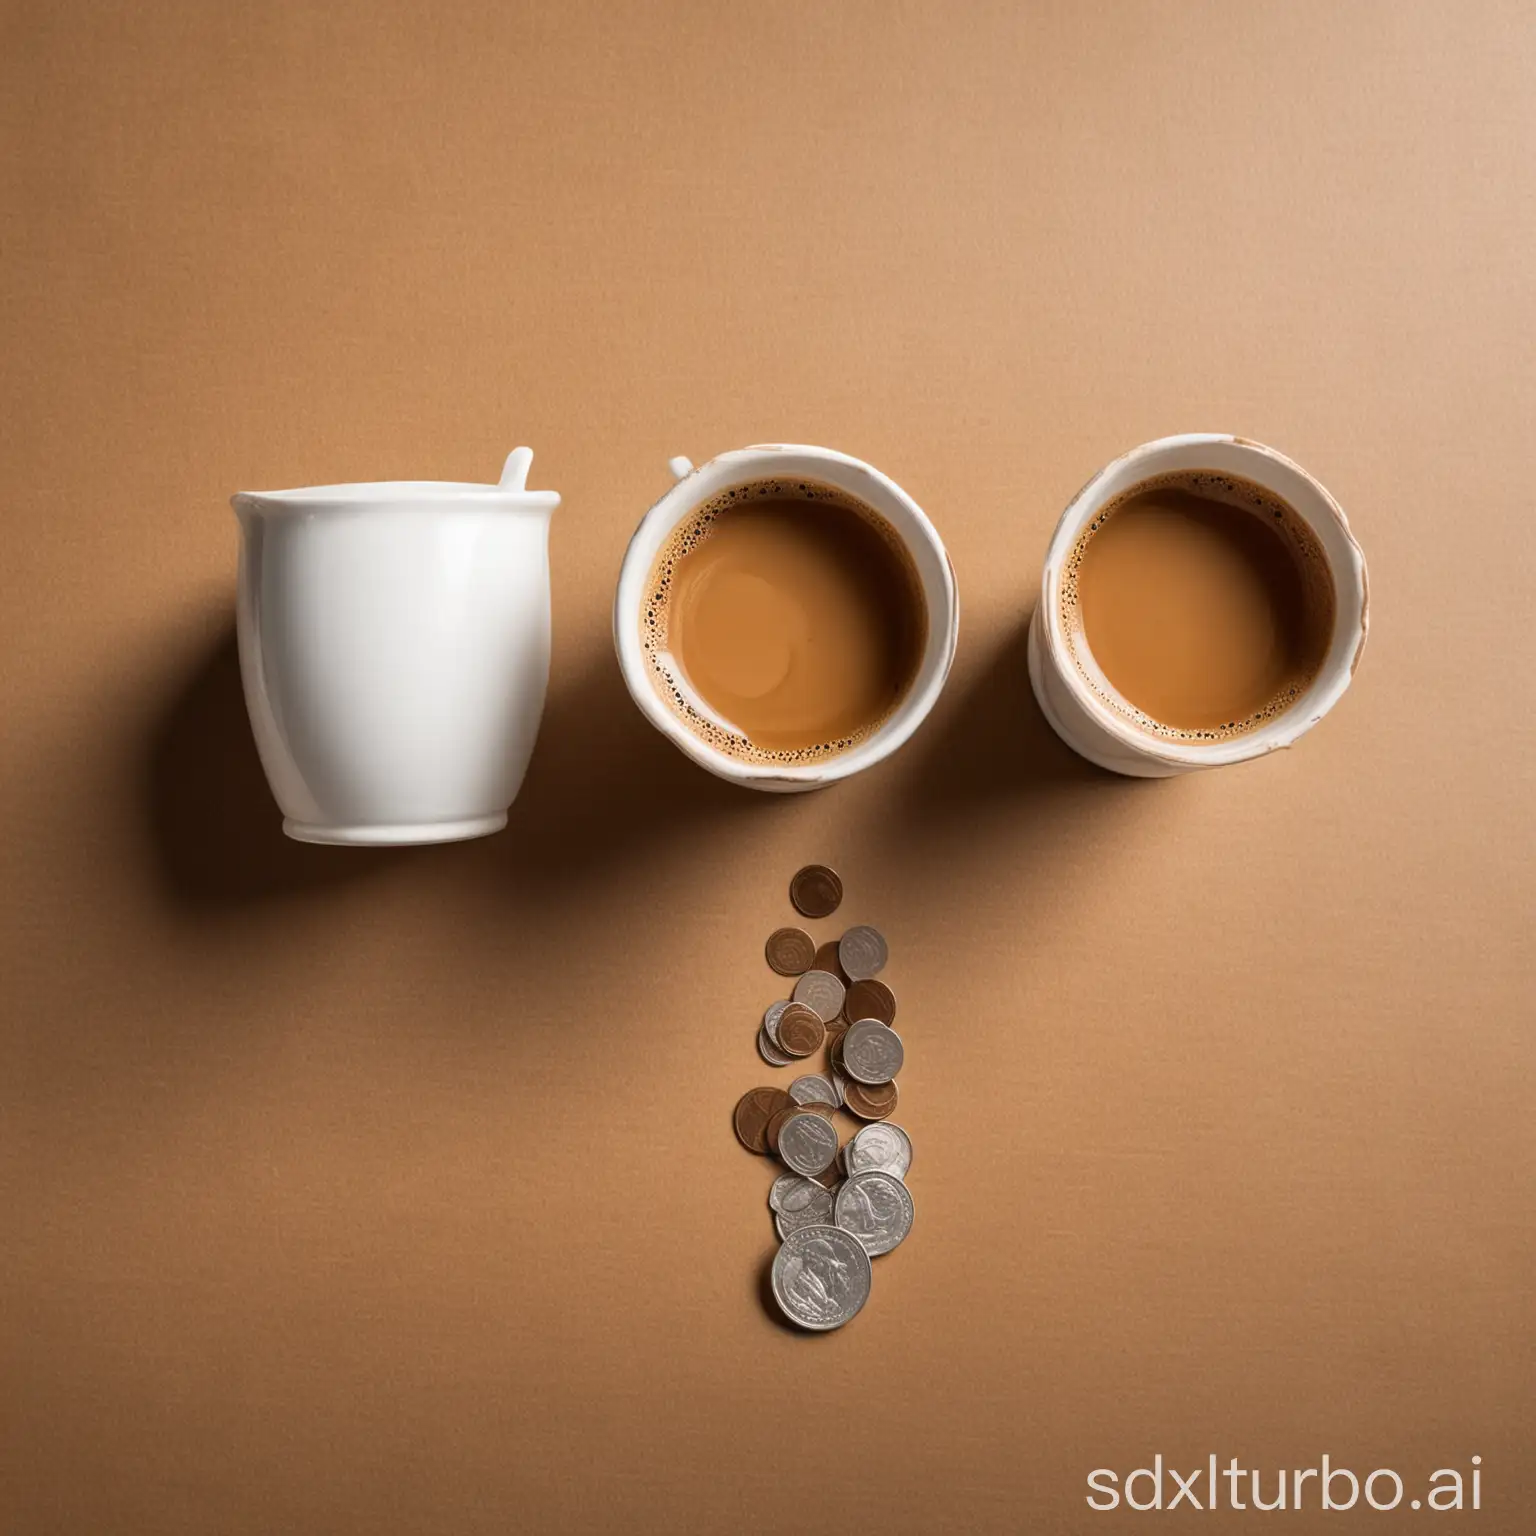 two empty coffee cups, standing upside down on the table, with some space between them (big enough for another cup) on which a coin lies, and a third cup, overturned slightly behind the imaginary line connecting the other two cups, specifically with the opening facing the viewer